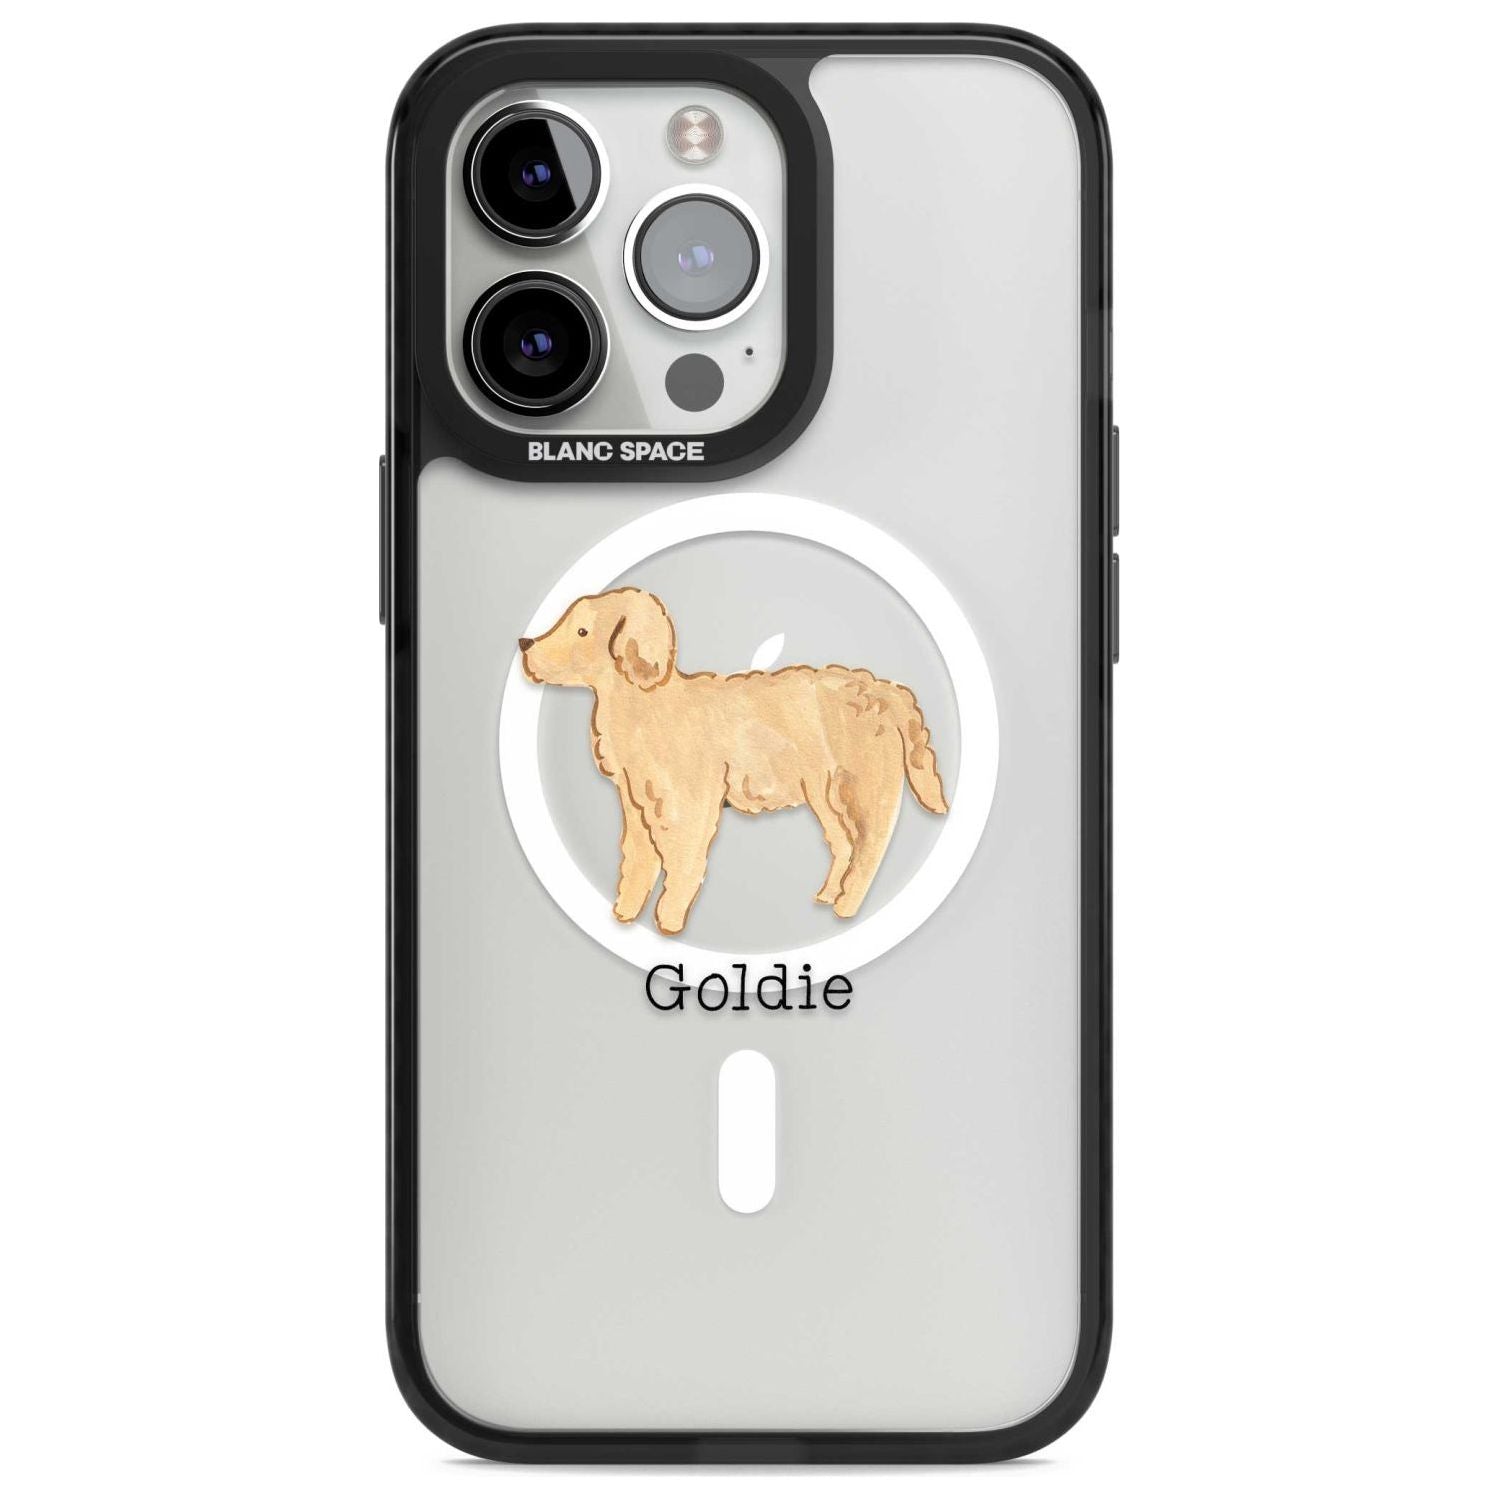 Personalised Hand Painted Goldendoodle Custom Phone Case iPhone 15 Pro Max / Magsafe Black Impact Case,iPhone 15 Pro / Magsafe Black Impact Case,iPhone 14 Pro Max / Magsafe Black Impact Case,iPhone 14 Pro / Magsafe Black Impact Case,iPhone 13 Pro / Magsafe Black Impact Case Blanc Space